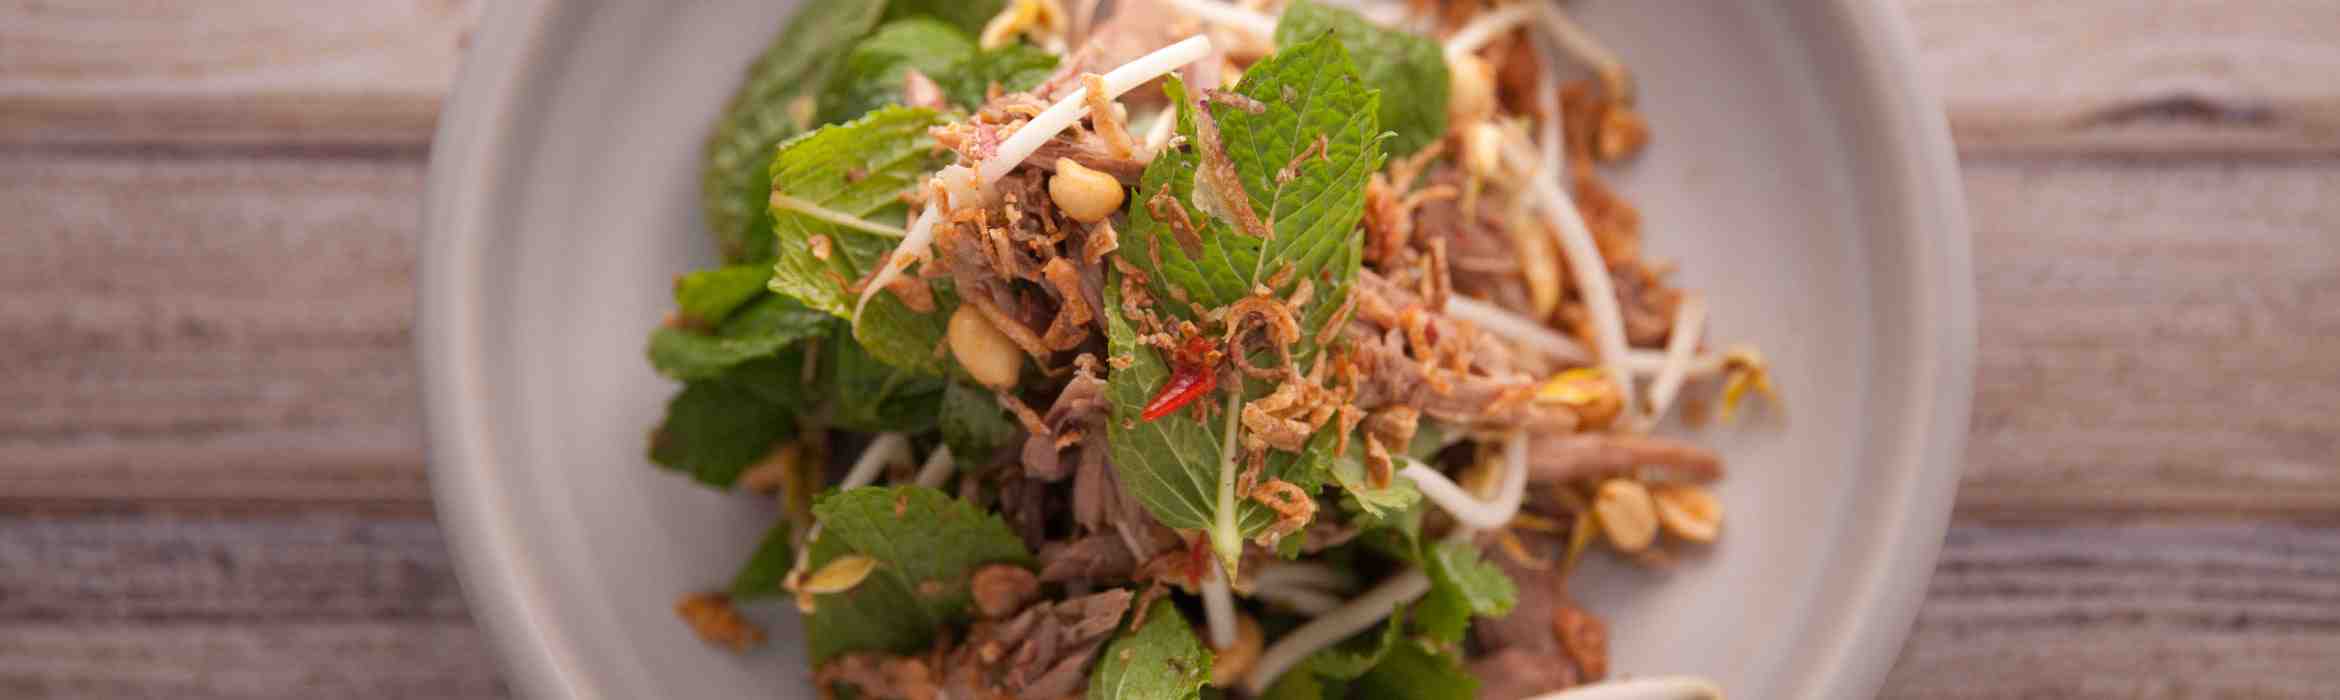 Slow Cooked Spiced Duck Salad Recipe